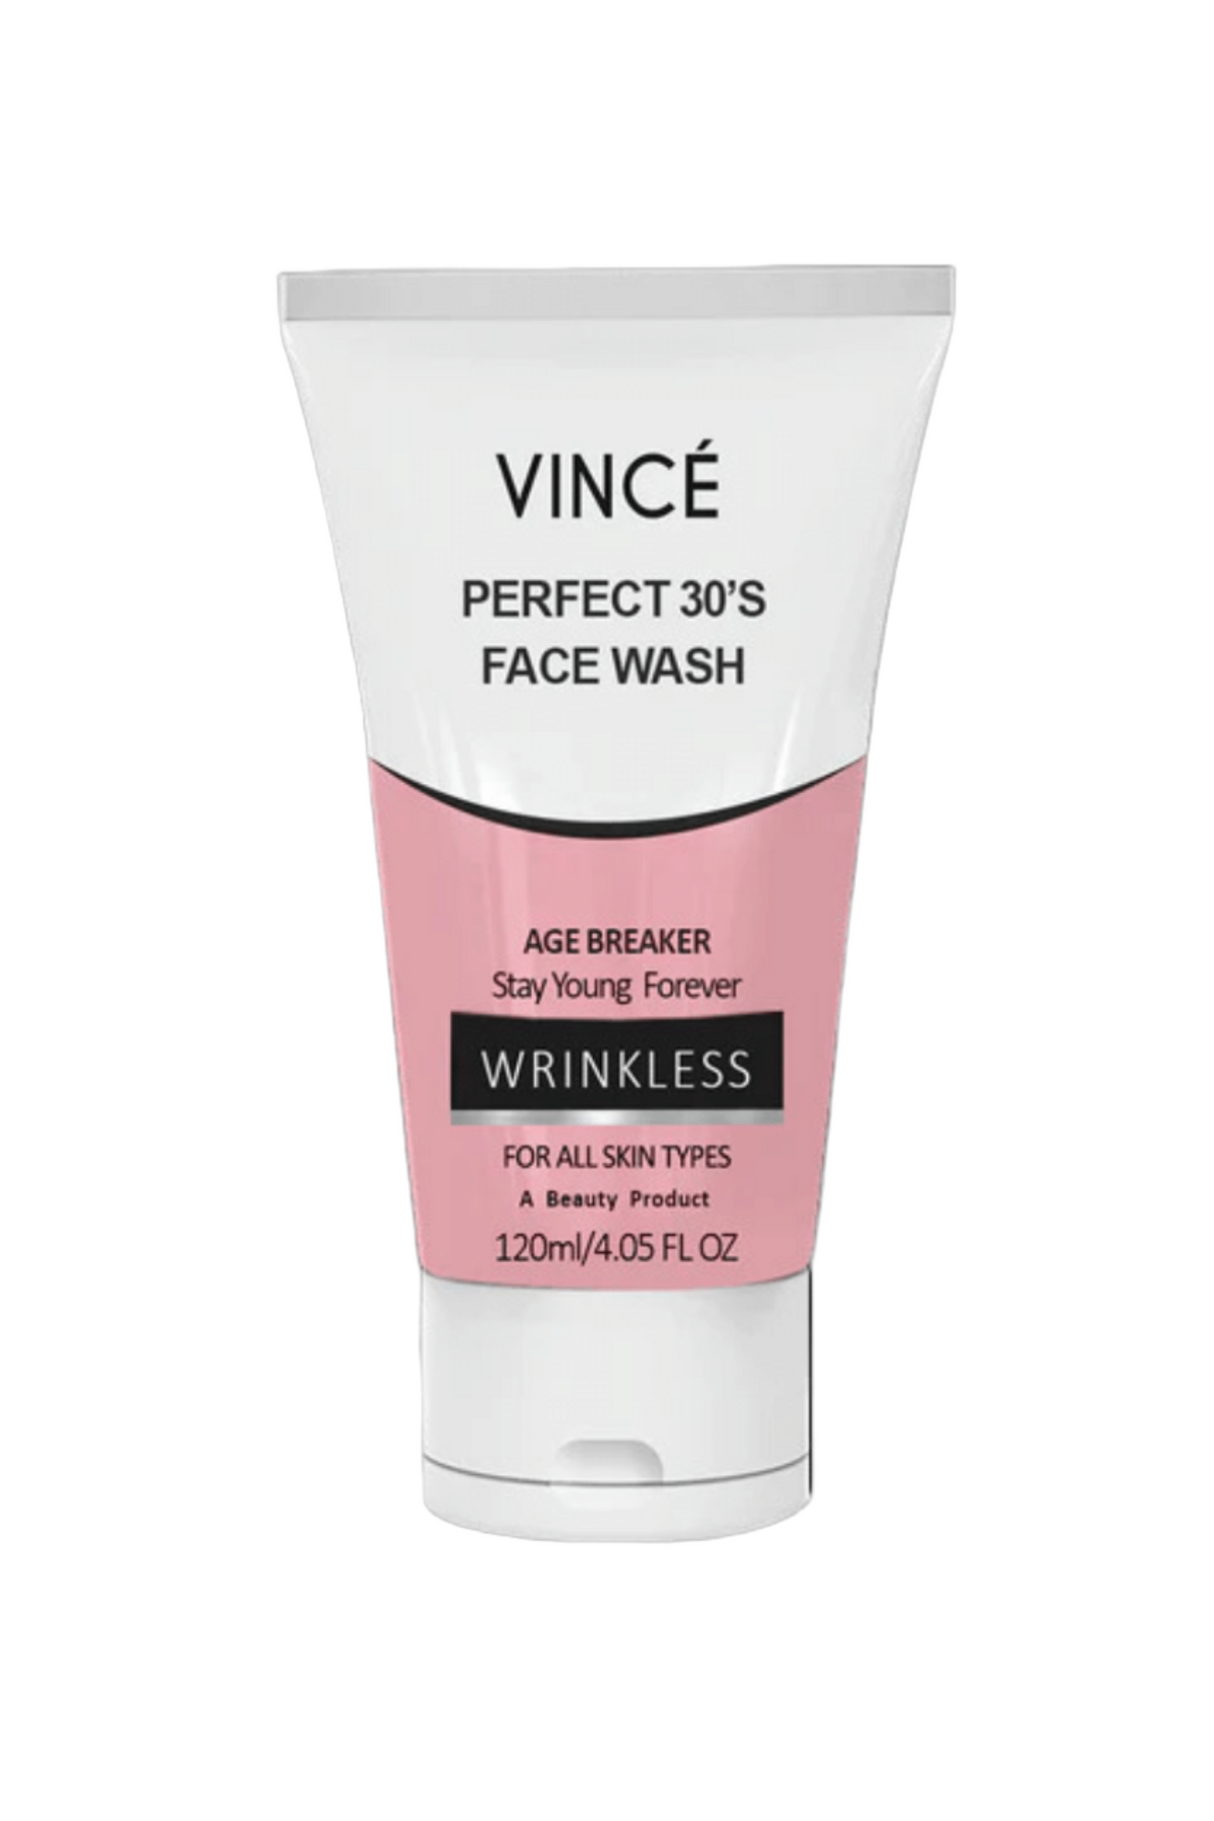 vince face wash perfect 30 120ml